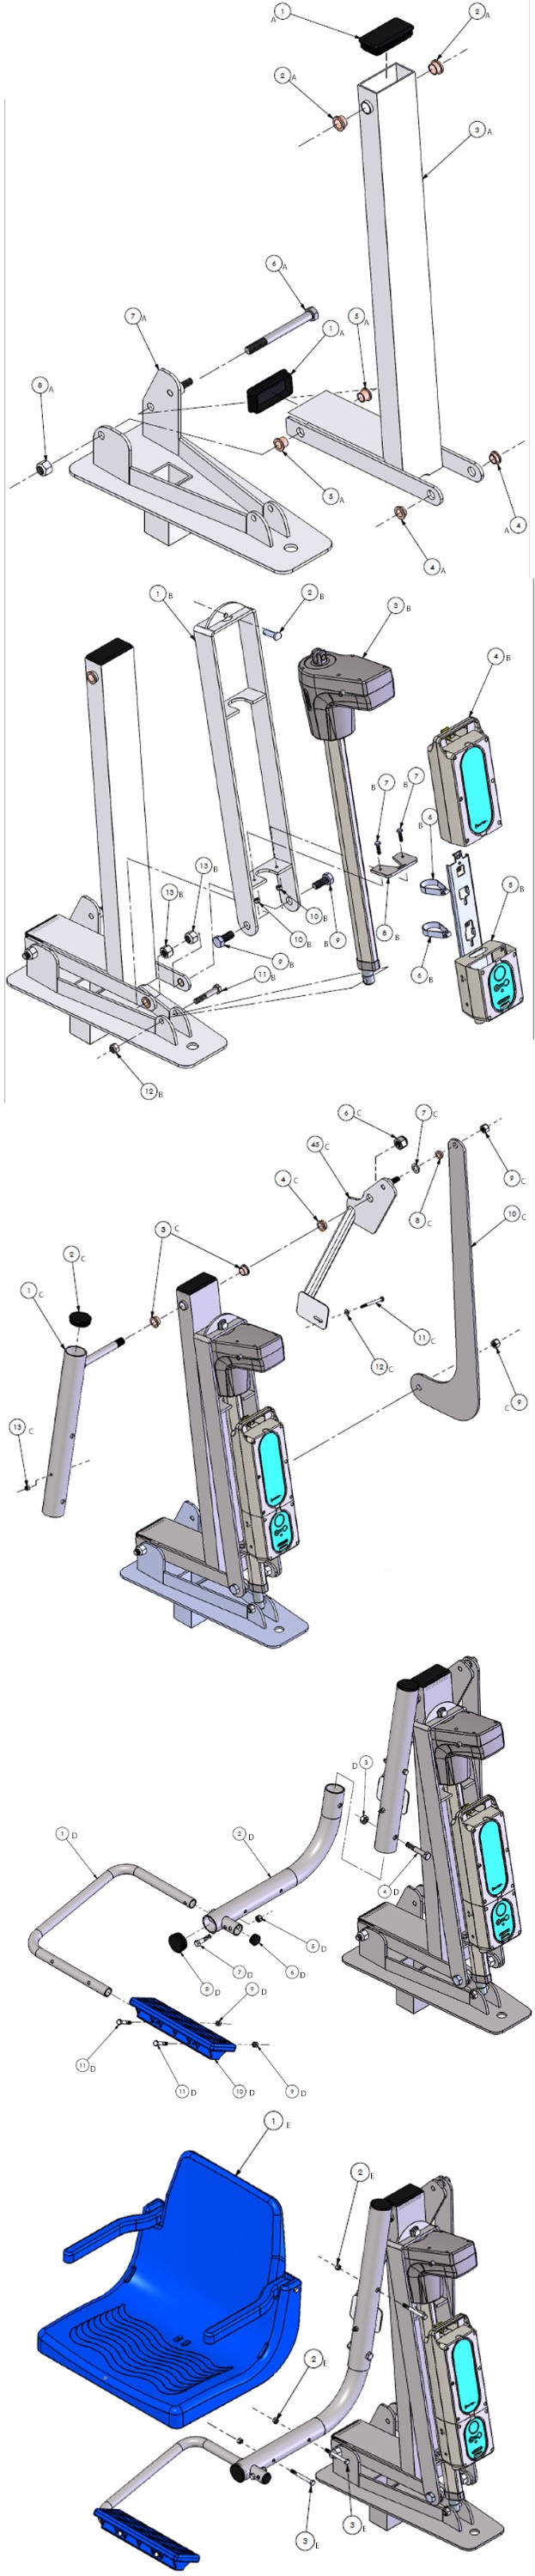 Global Pool Products Superior Series SXR Extended Reach Pool Lift | No Anchor | SXR-NA Parts Schematic